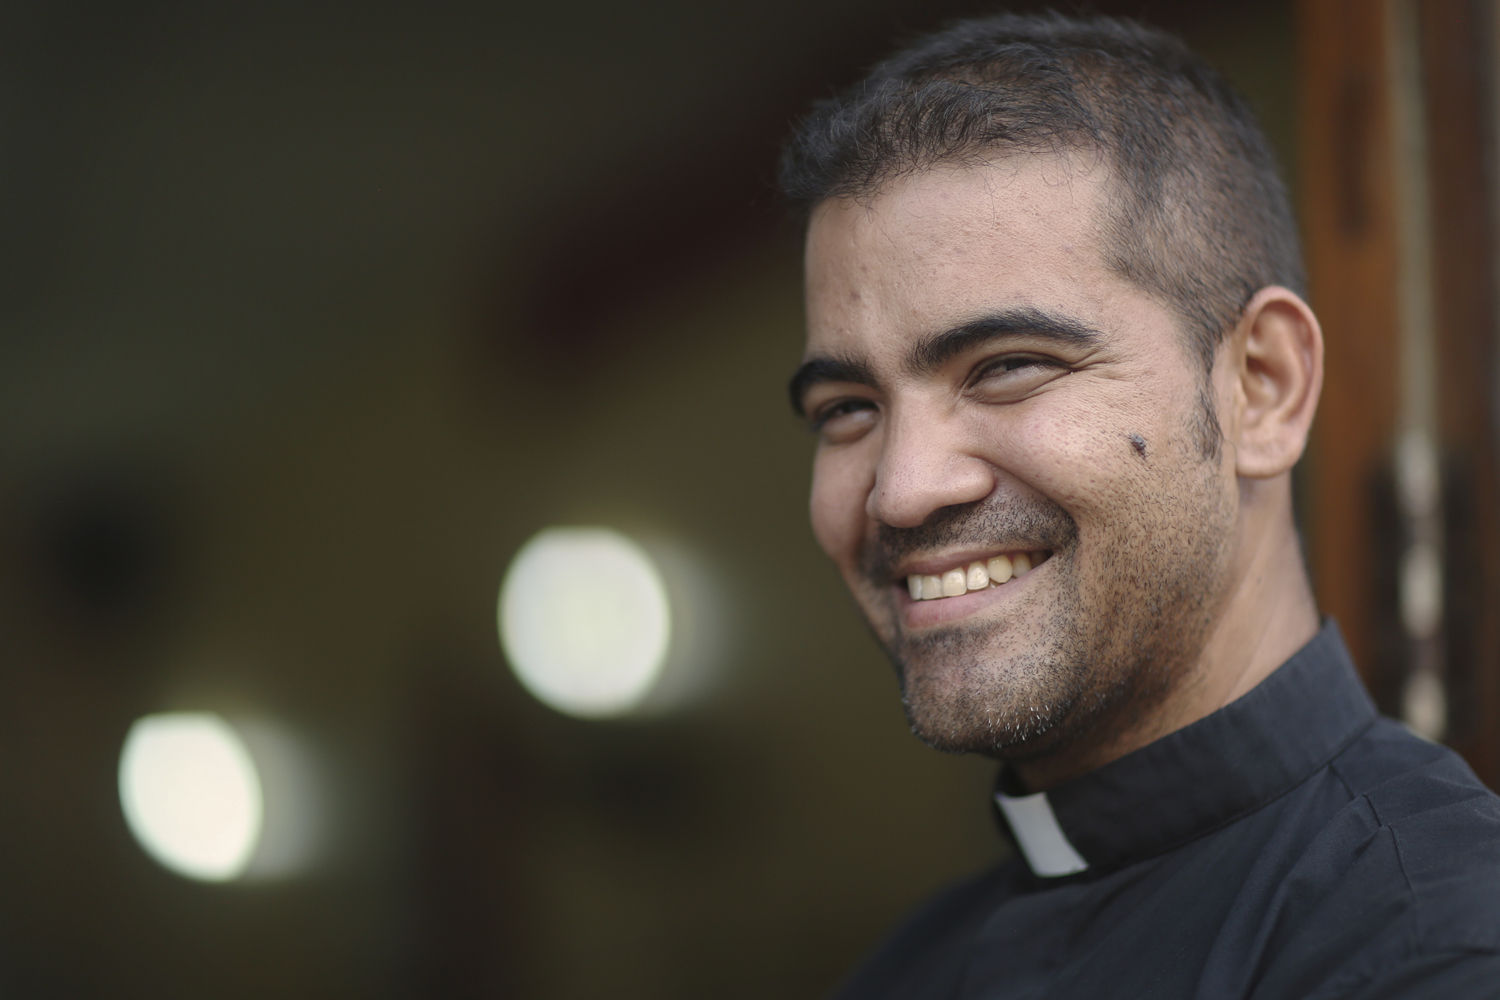 Fr. Alvaro Torres volunteers by providing meals to the community three times a week.